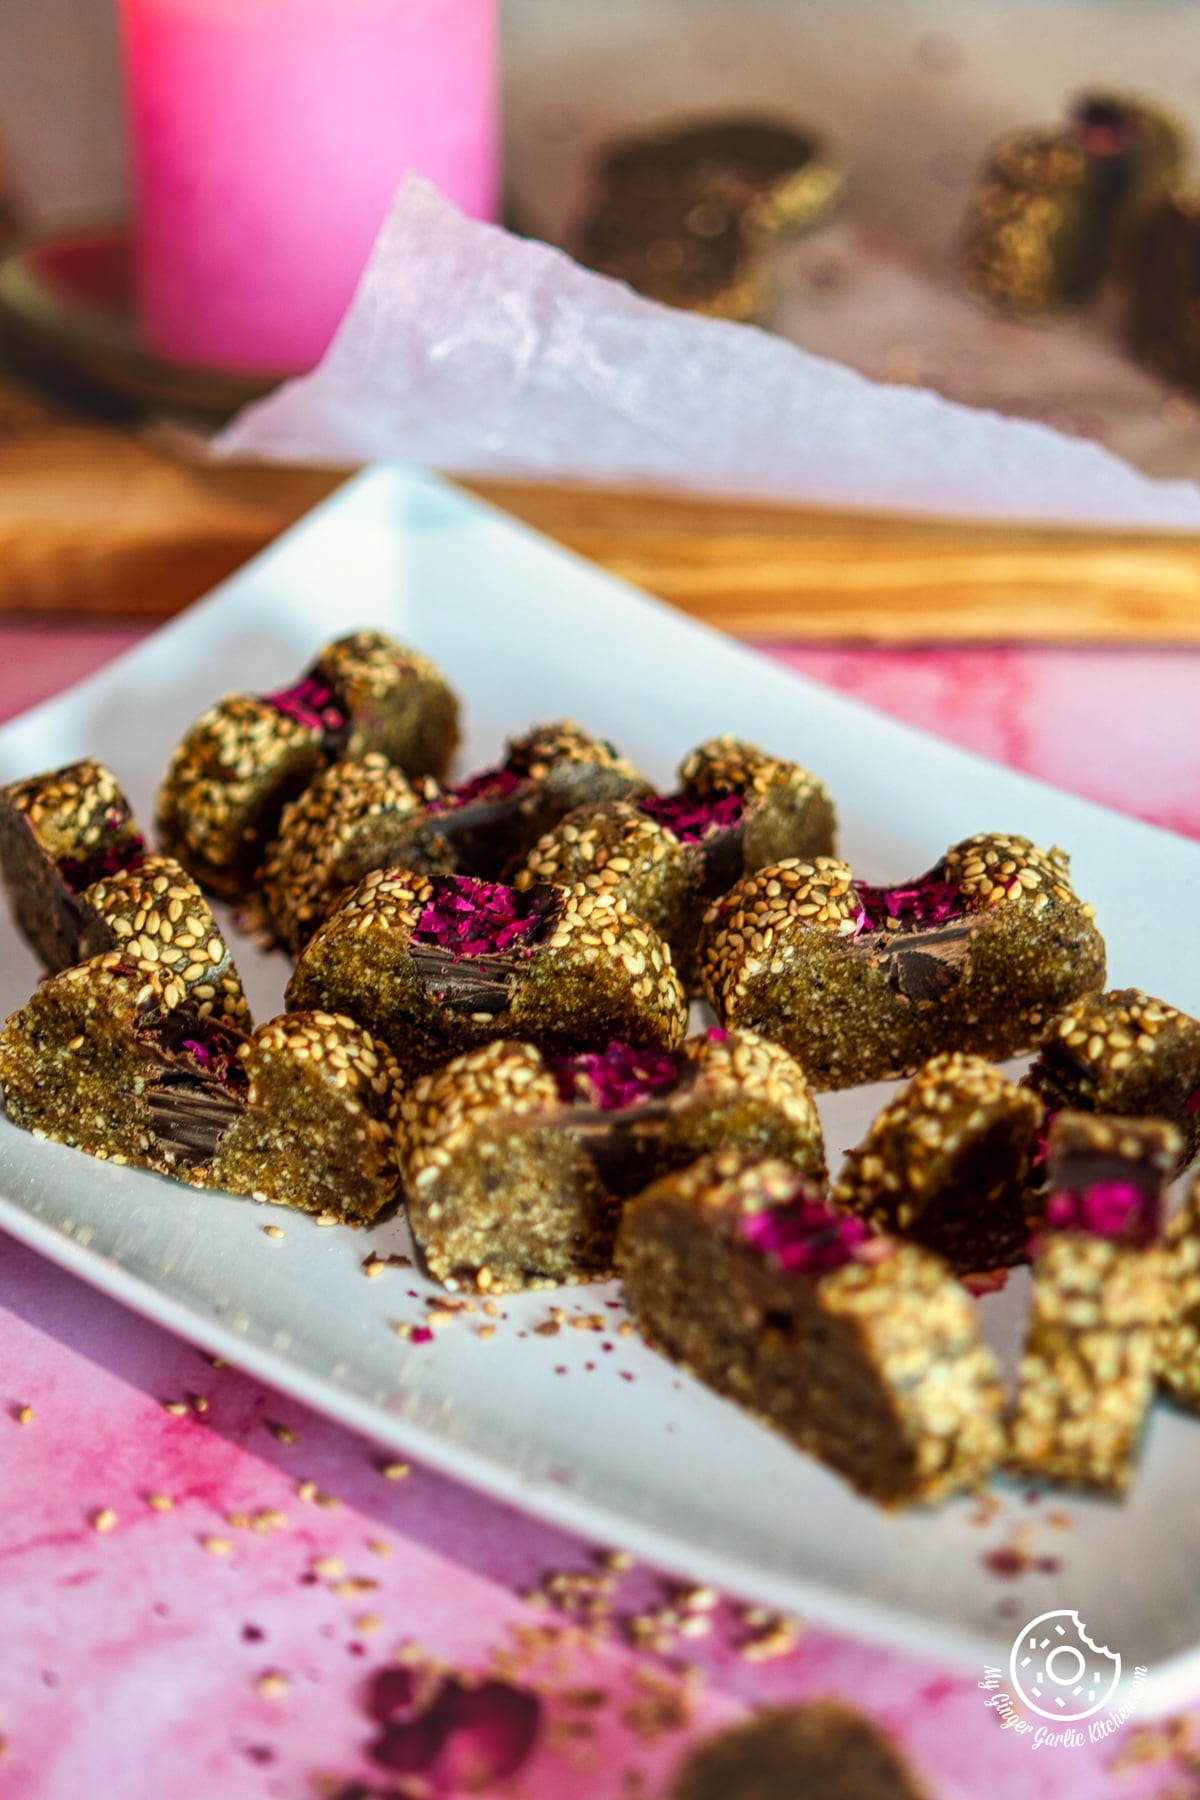 peanut date roll decorated with rose petals in a white rectangle plate